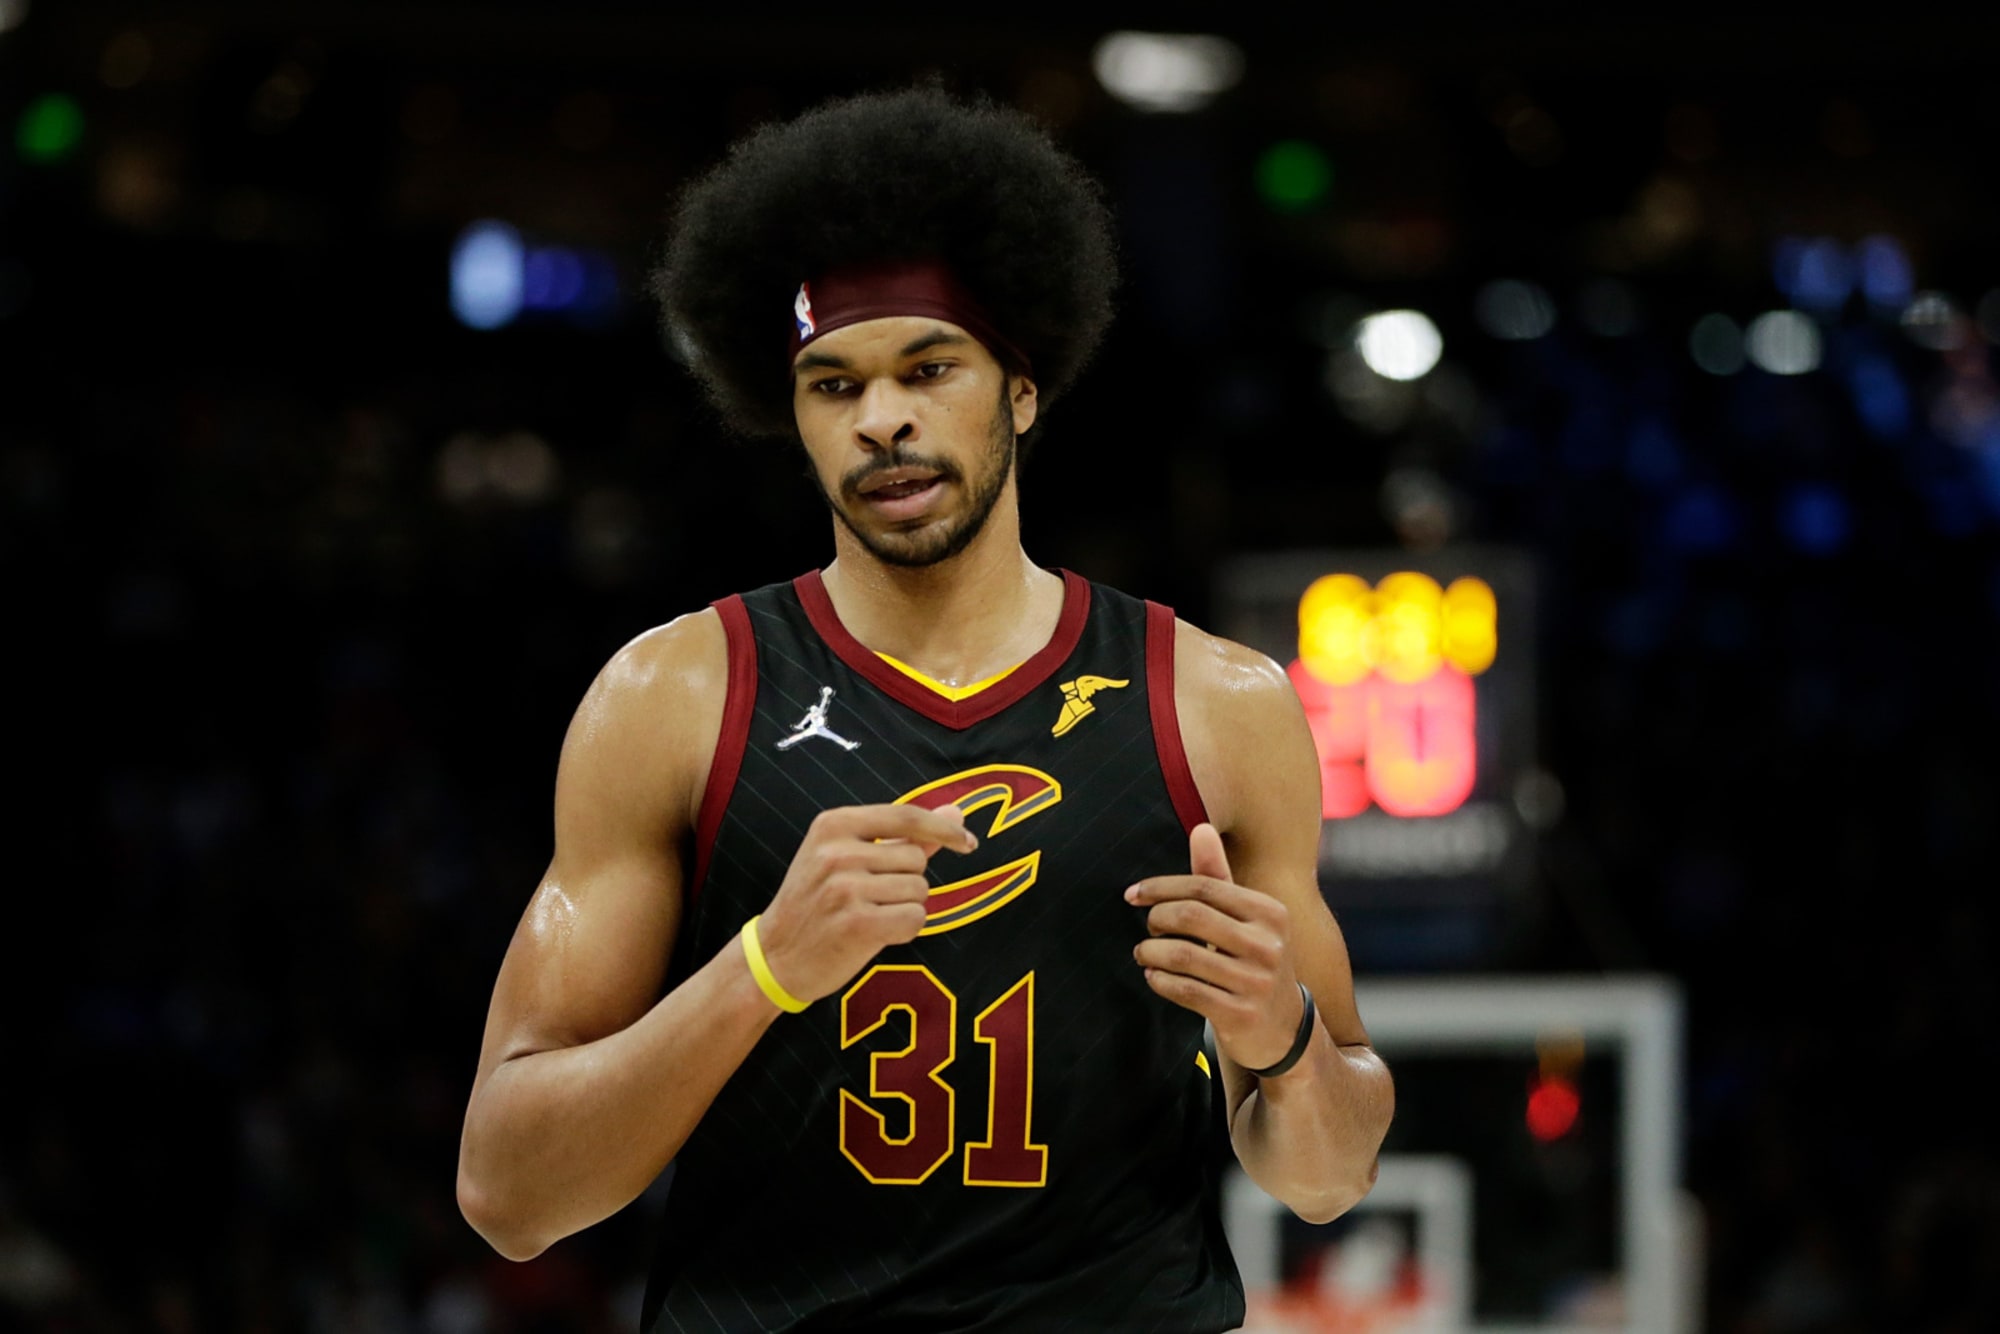 Jarrett Allen's scoring for Cavs may decline after '22, but it may not